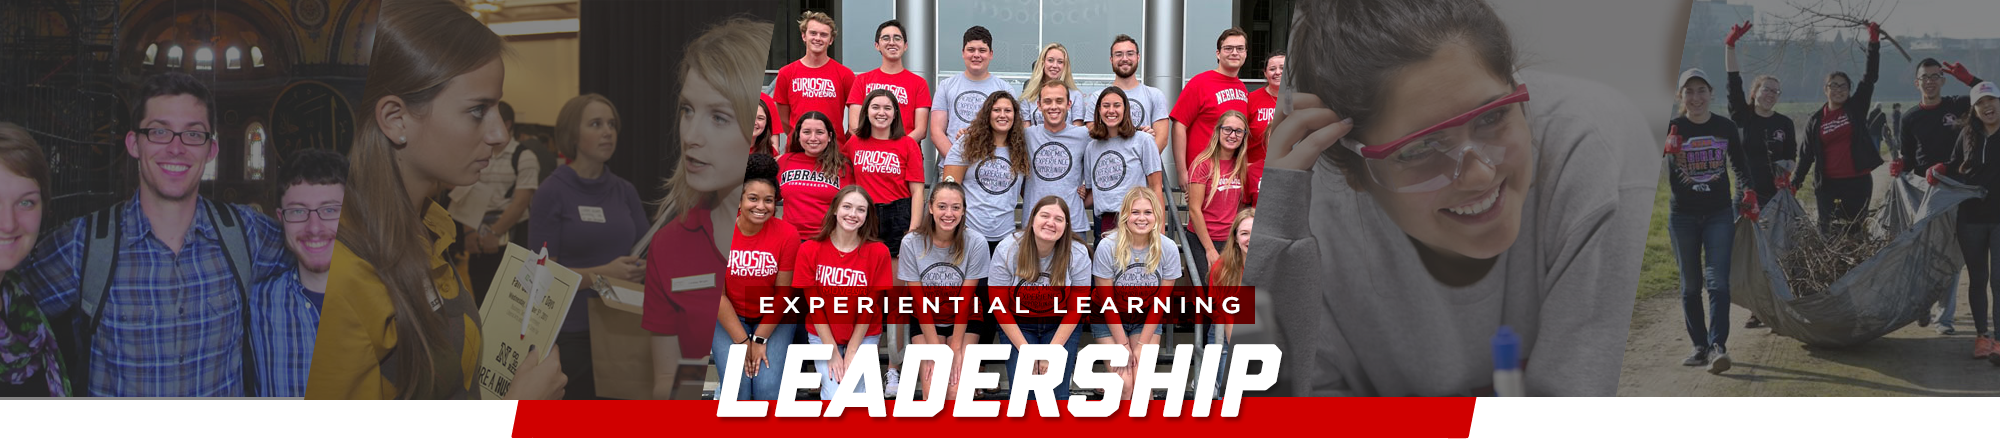 Leadership - Experiential Learning